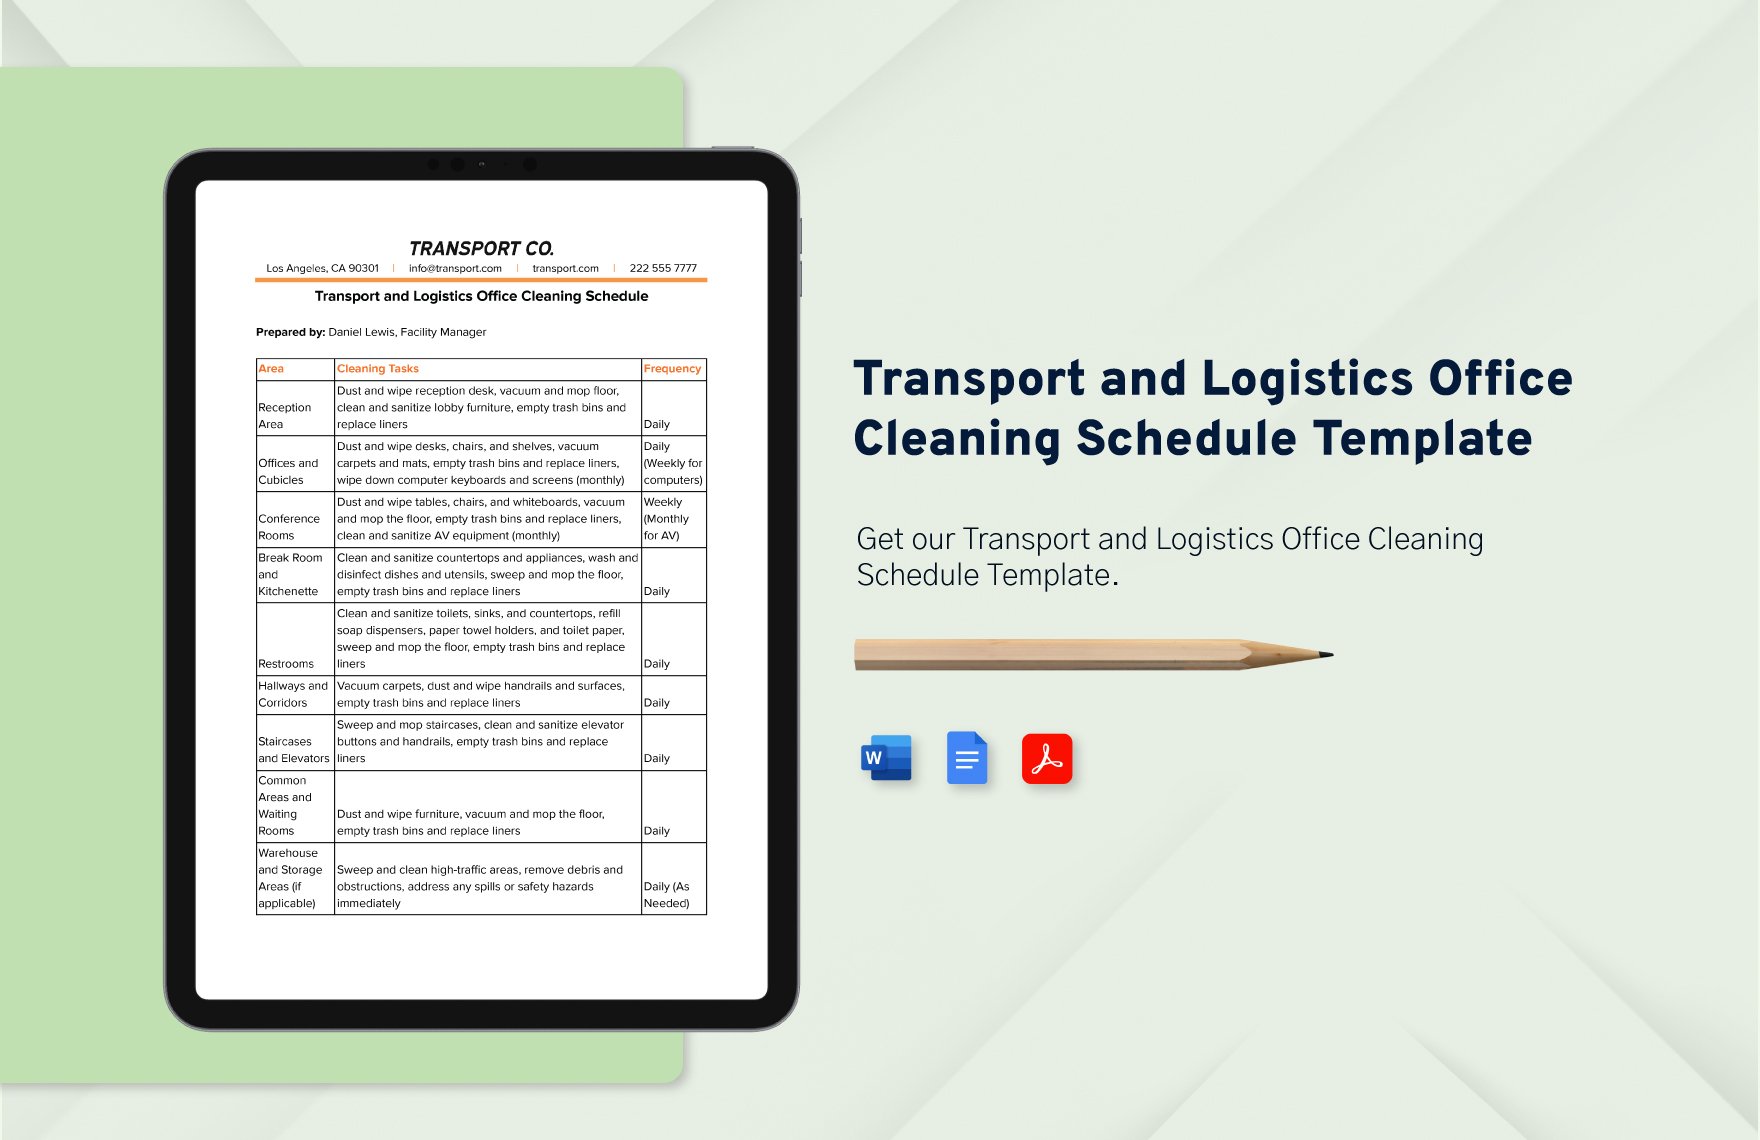 Transport and Logistics Office Cleaning Schedule Template